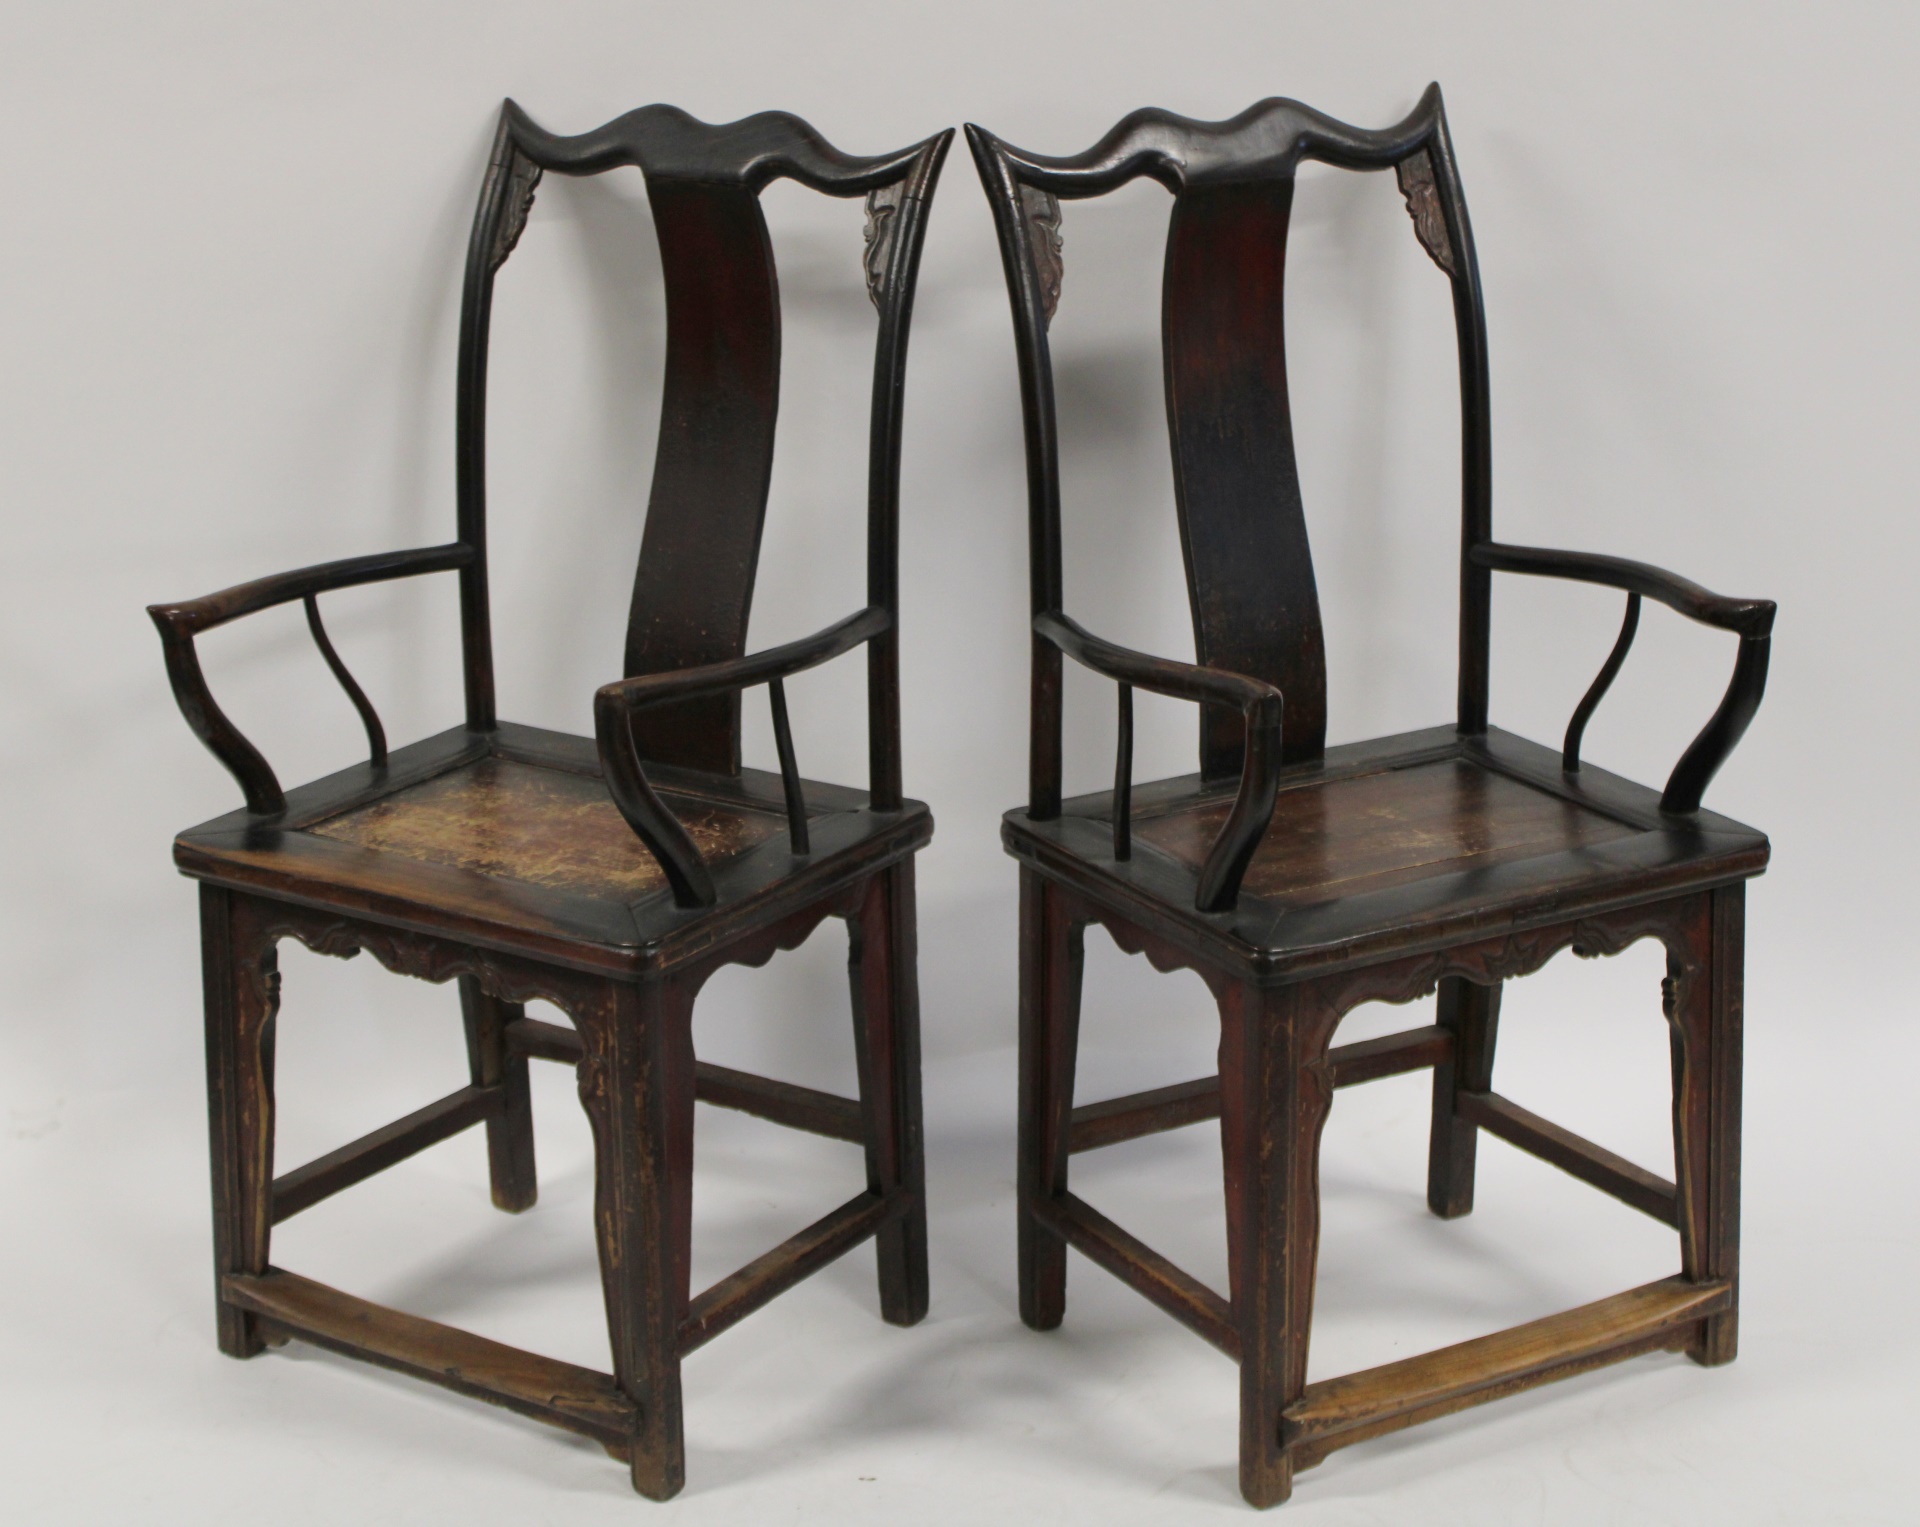 AN ANTIQUE PAIR OF CHINESE HARDWOOD